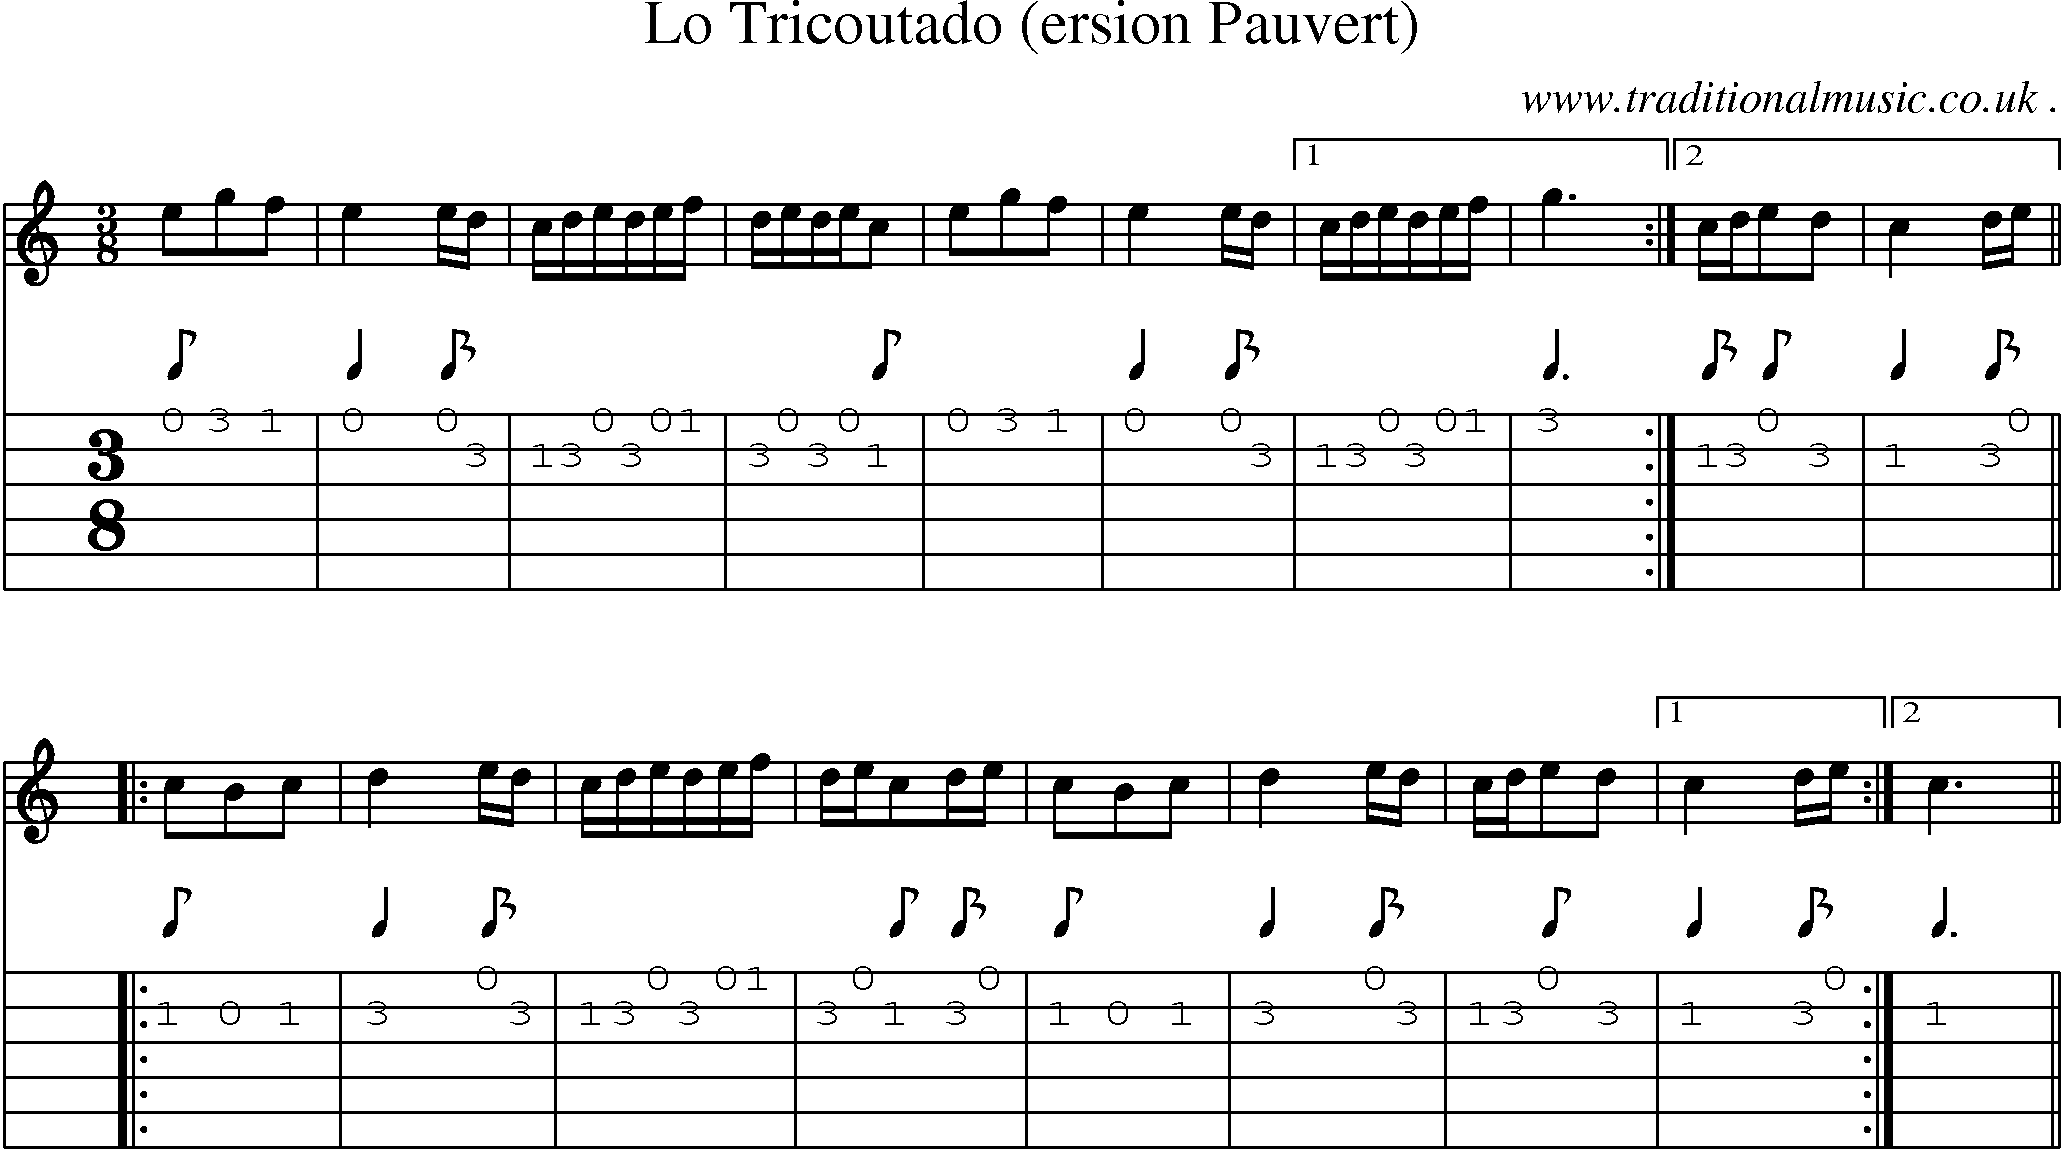 Sheet-Music and Guitar Tabs for Lo Tricoutado (ersion Pauvert)